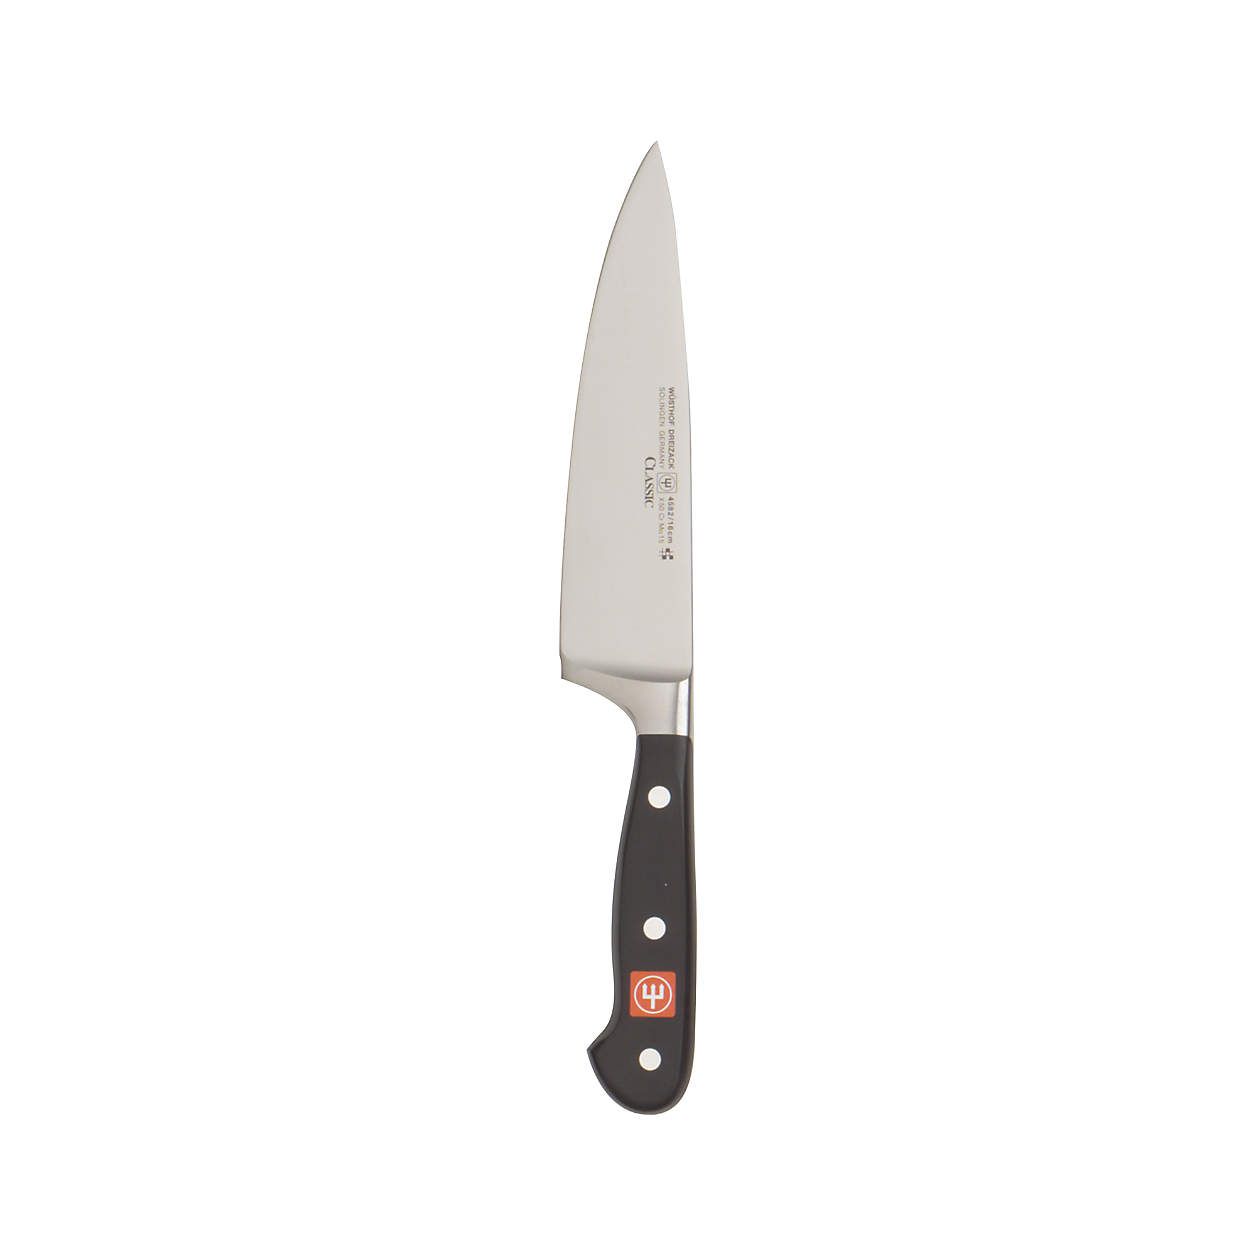 Wüsthof Classic 6" Chef's Knife + Reviews | Crate and Barrel | Crate & Barrel